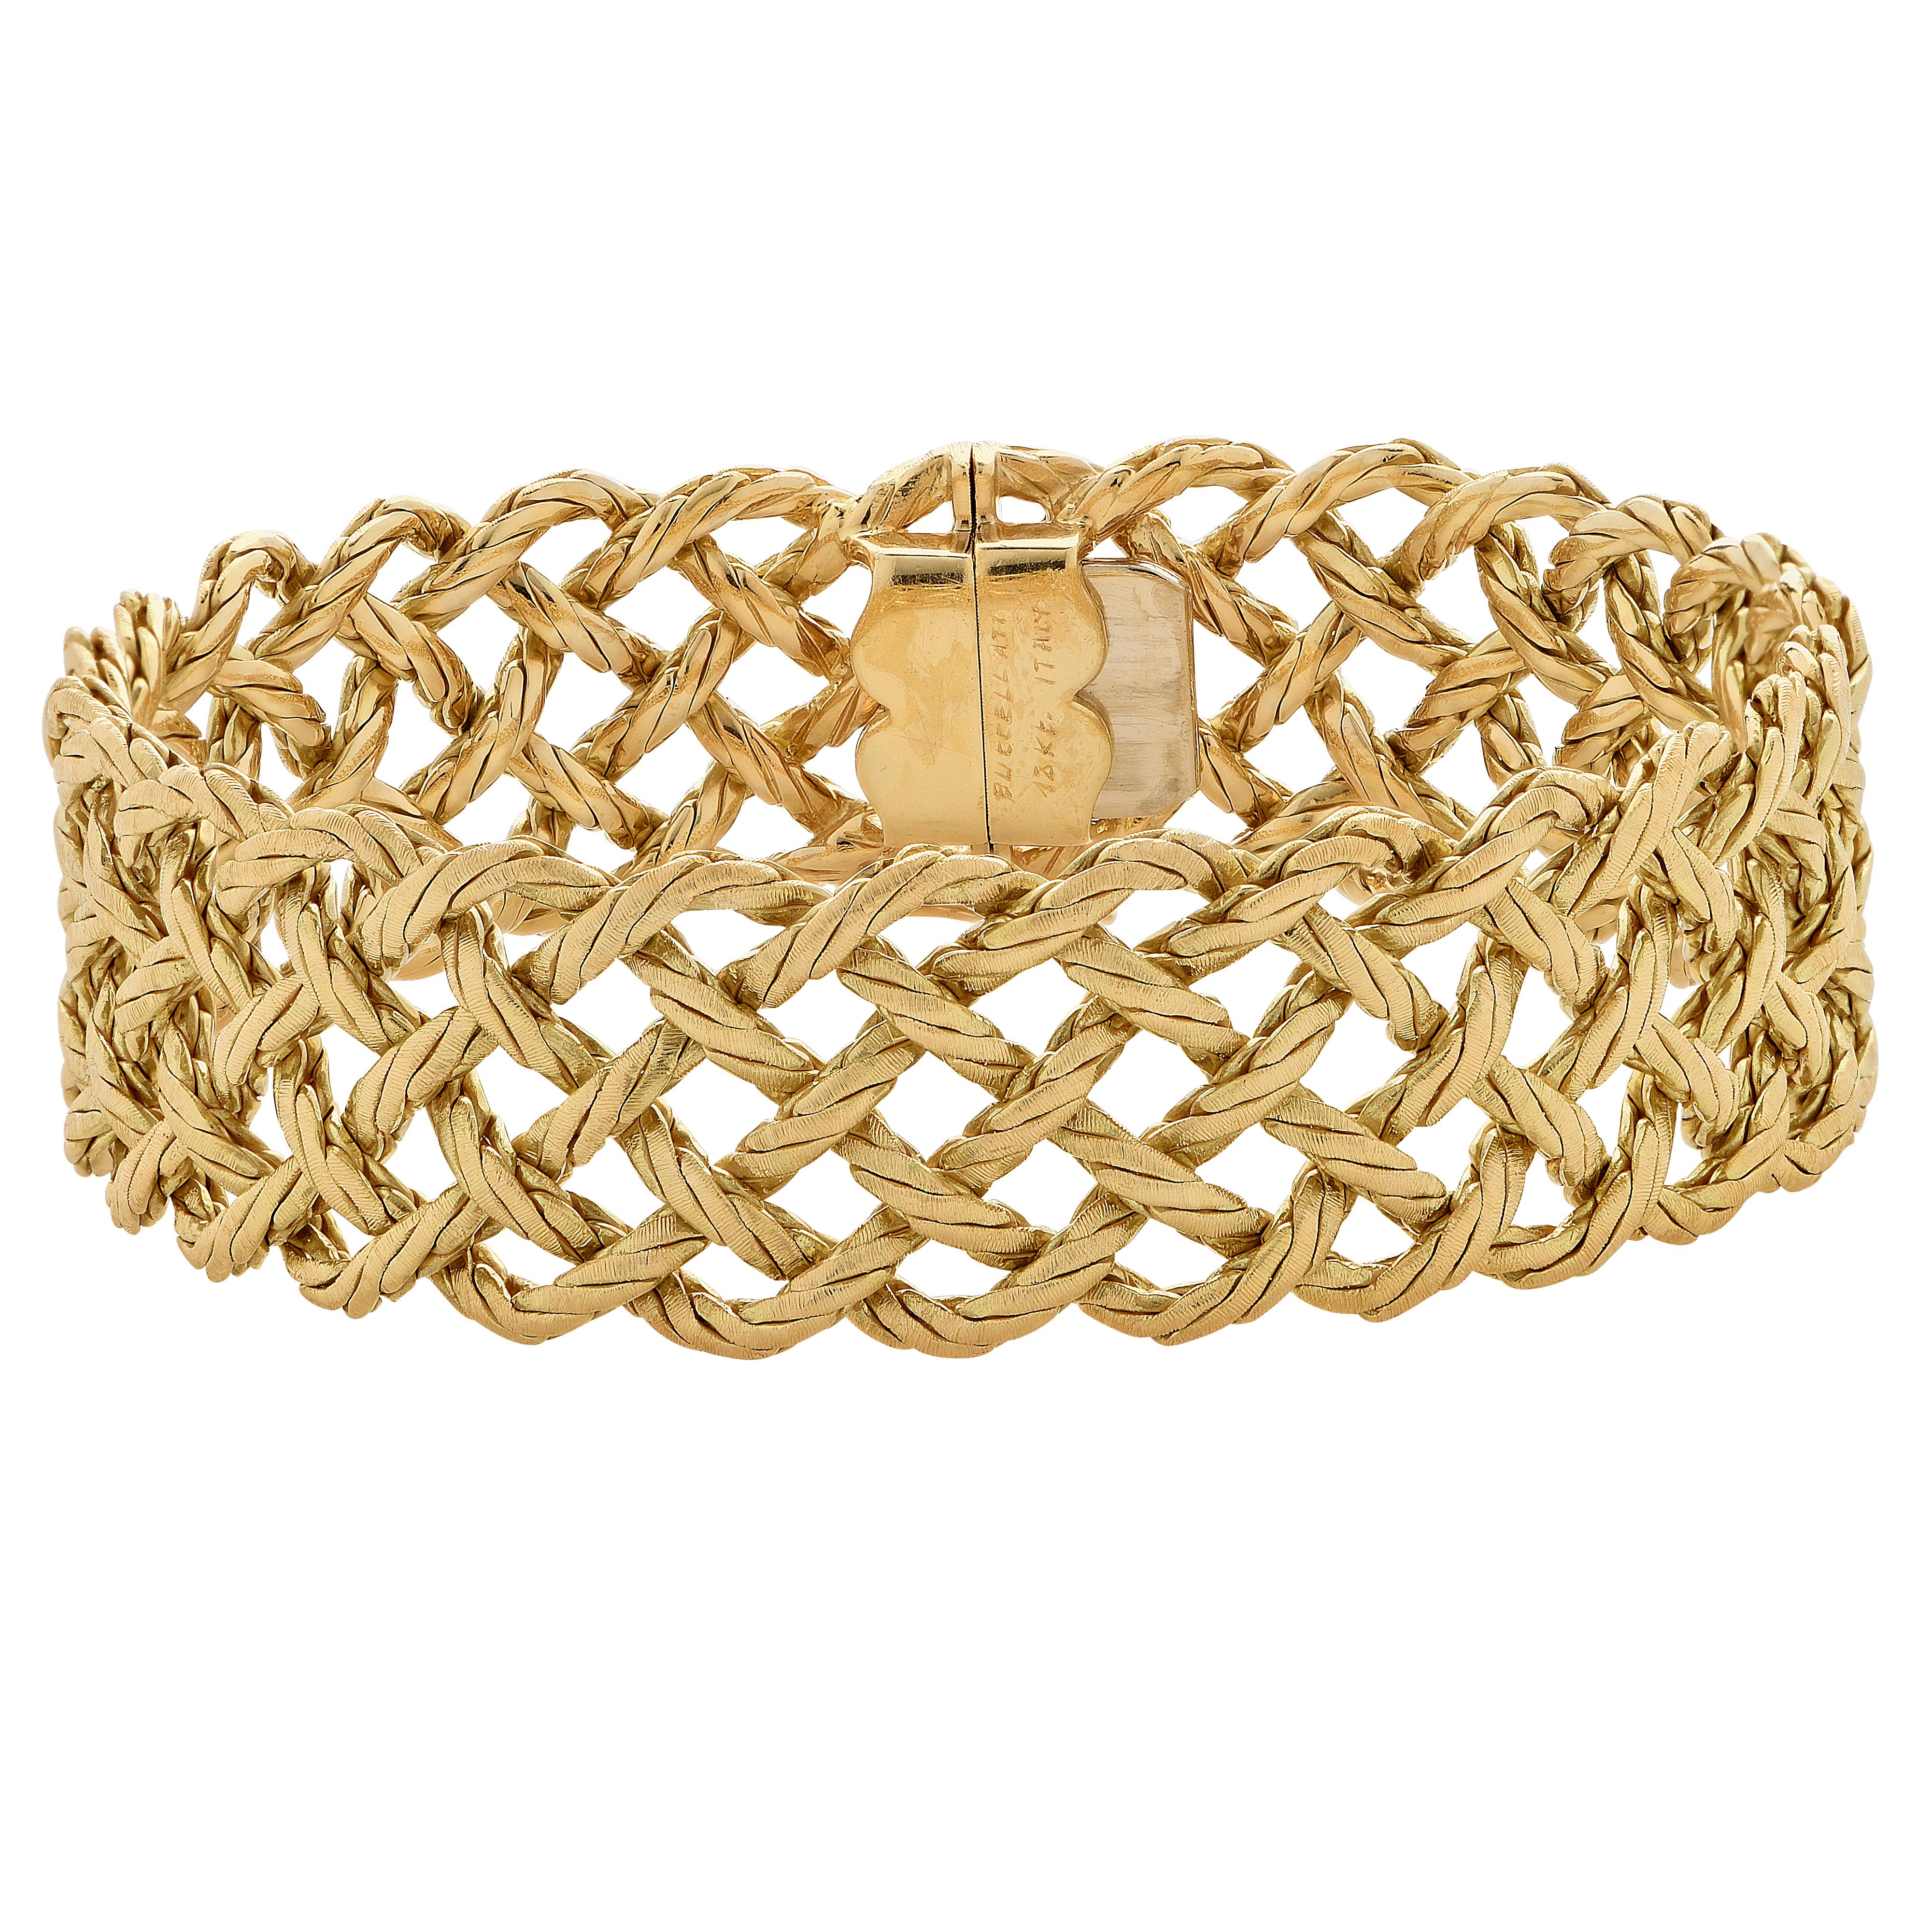 Spectacular bracelet from the Crepe De Chine Collection by Buccellati, crafted in 18 karat yellow gold, featuring a hand-woven design accented with hand engravings. This beautiful bracelet exemplifies Buccellati's exquisite craftsmanship with an